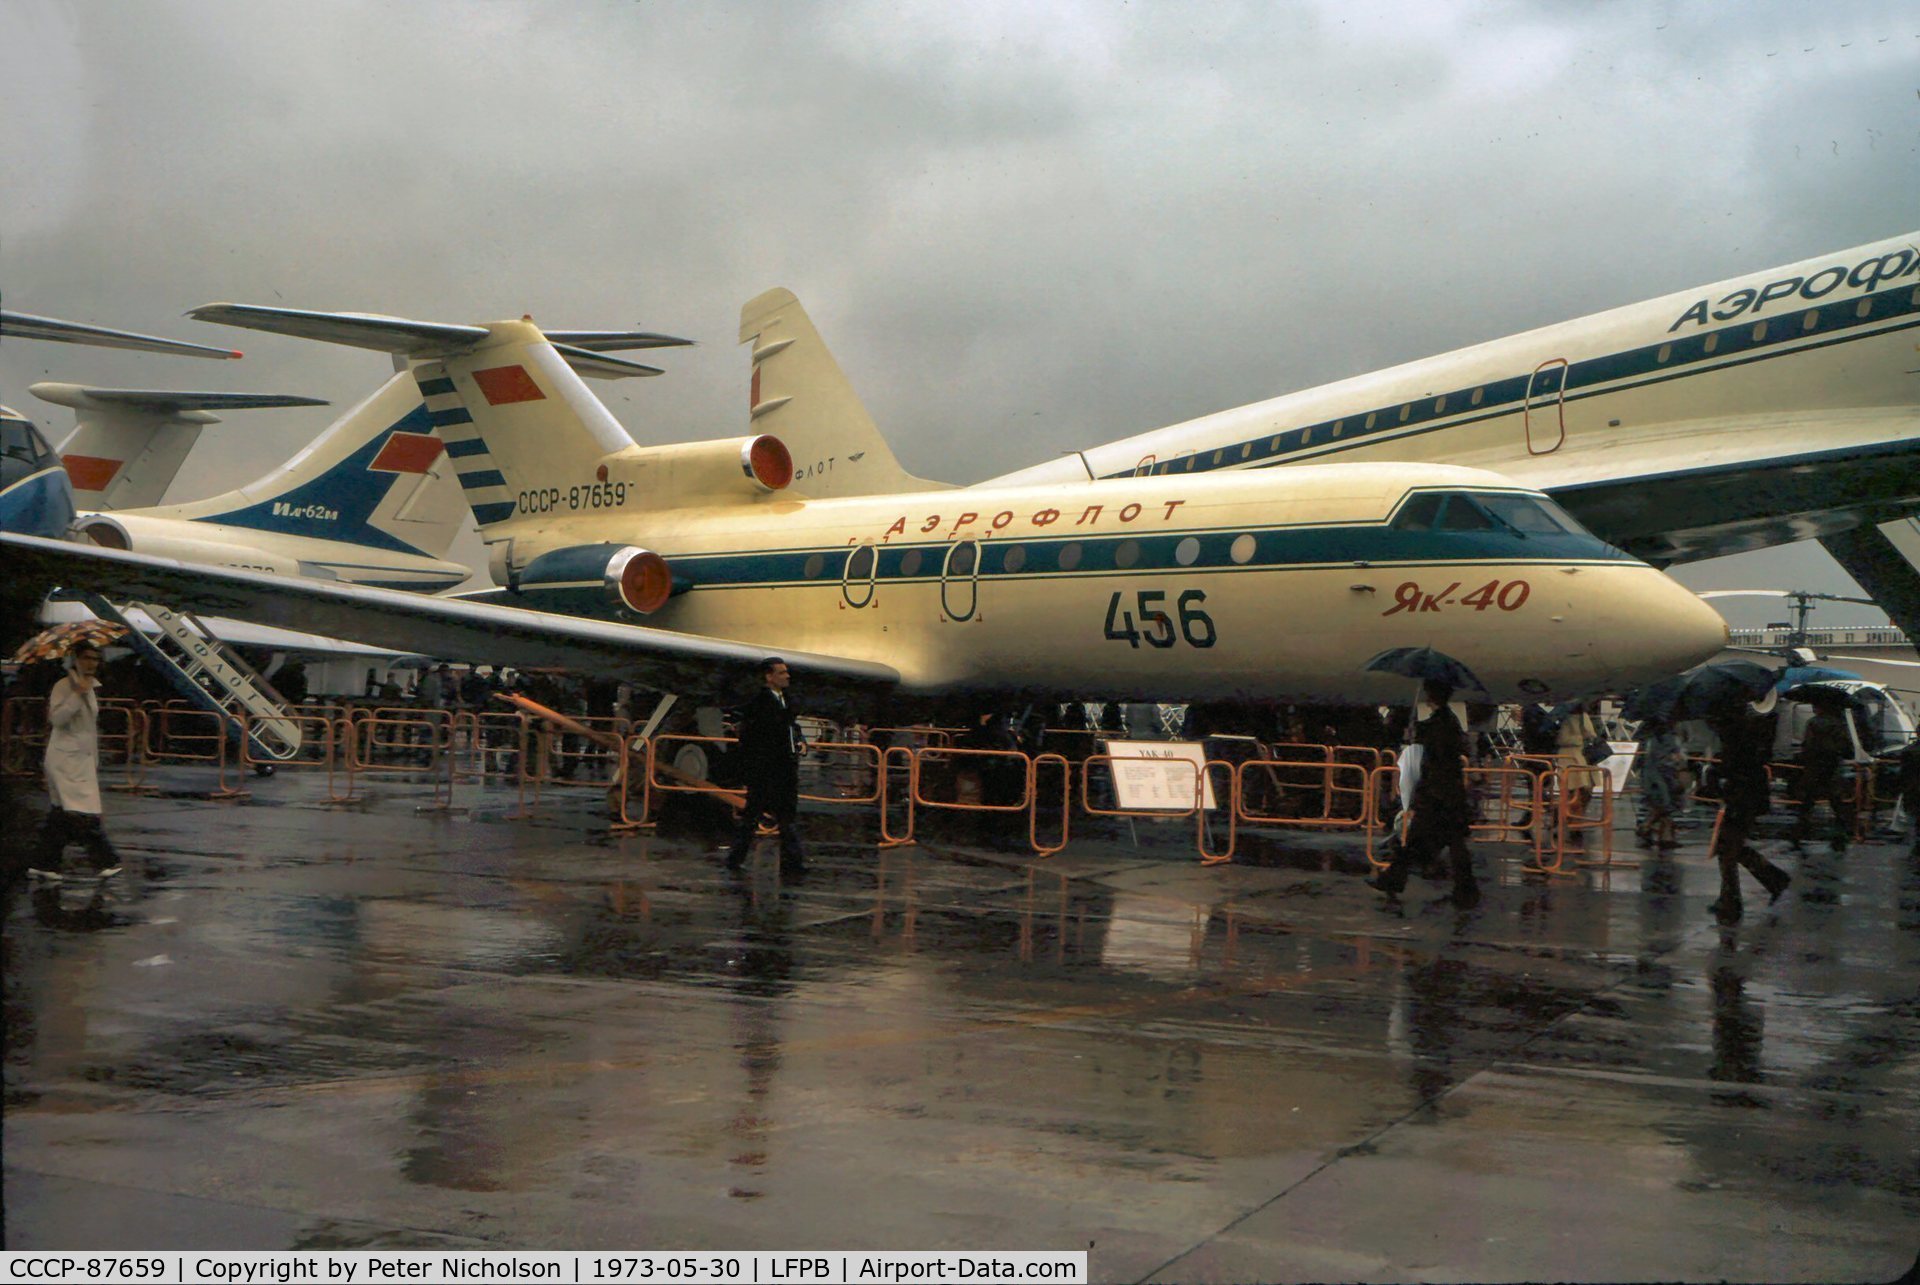 CCCP-87659, 1973 Yakovlev Yak-40 C/N 9240325, This Codling of Aeroflot was displayed at the 1973 Paris Airshow at Le Bourget.